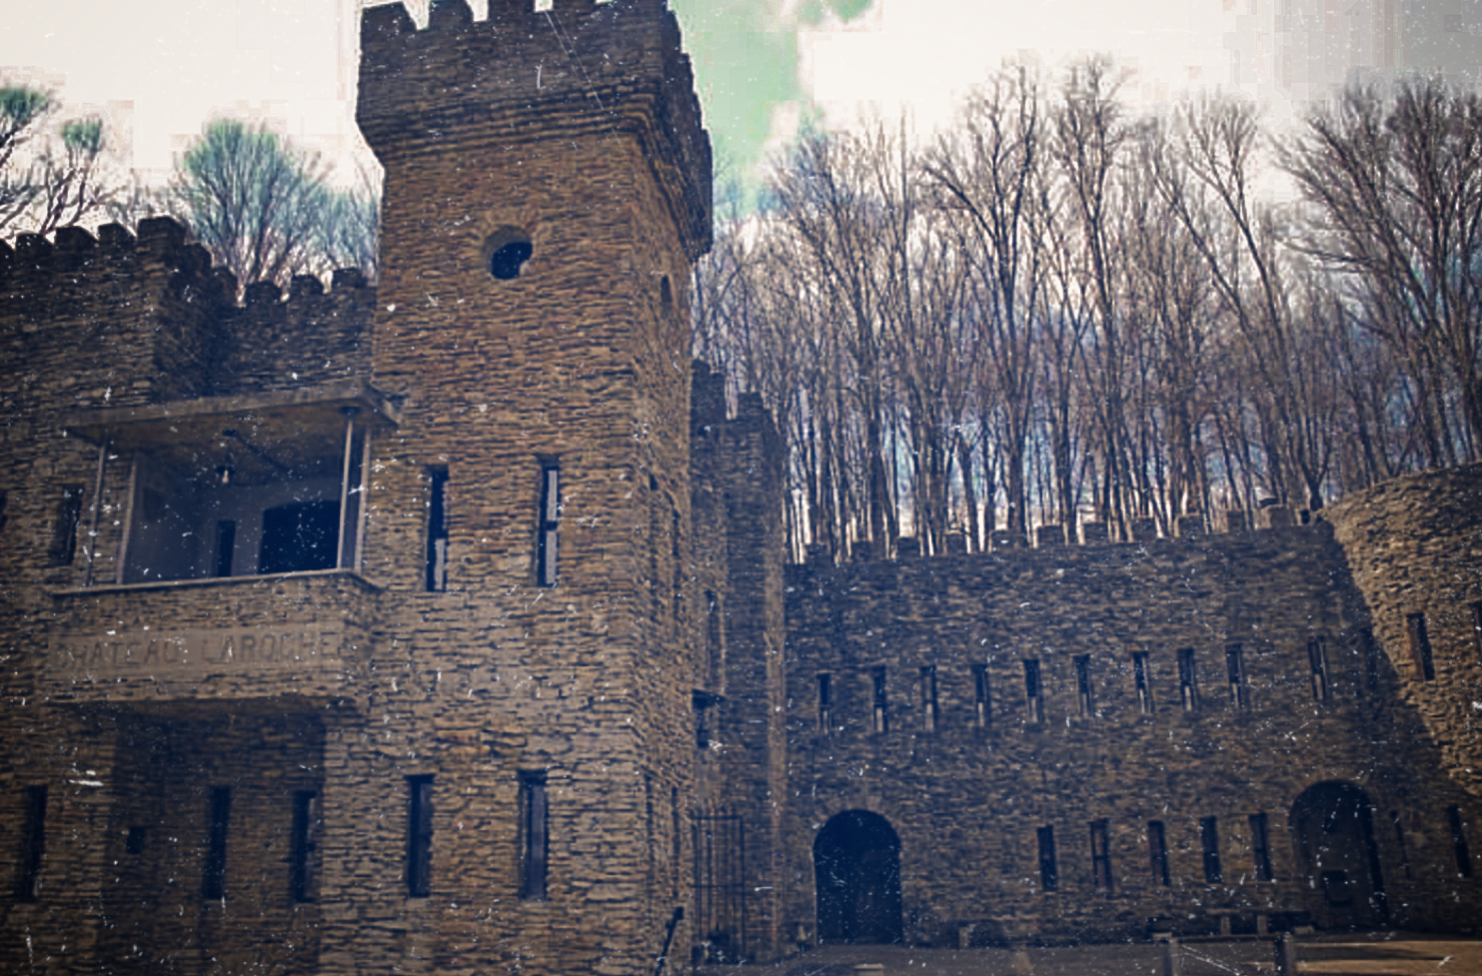 Ohio has one of the most mesmerizing castles ever but believe it or not, it’s haunted!